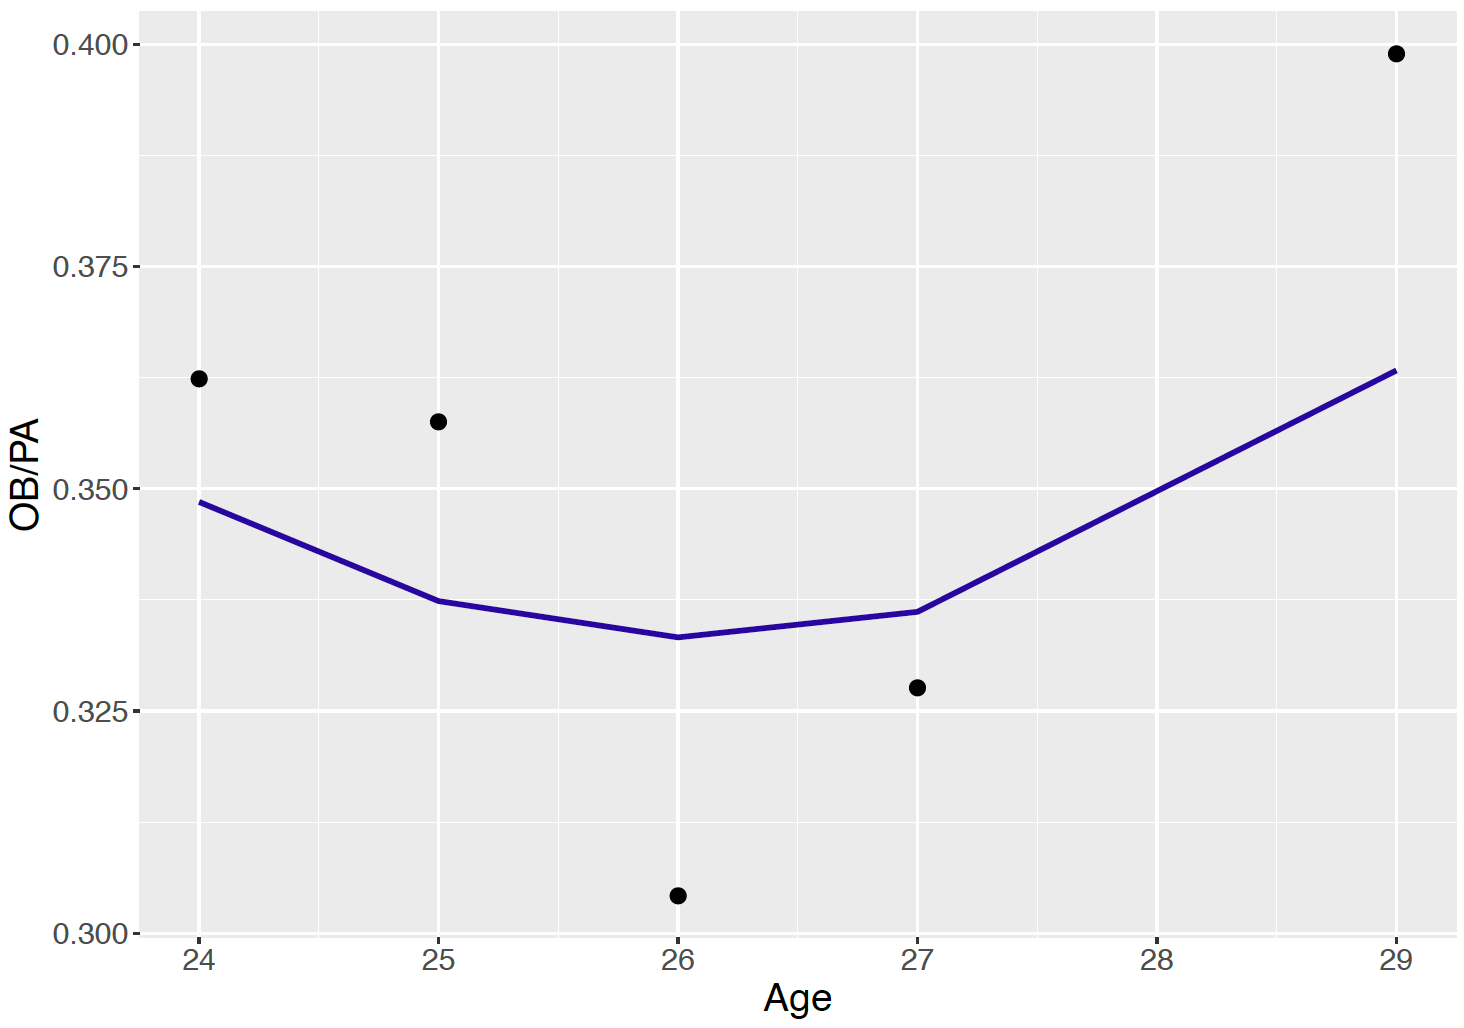 Career trajectory of Josh Phelps' on-base percentages.  A quadratic smoothing curve is added to the plot.